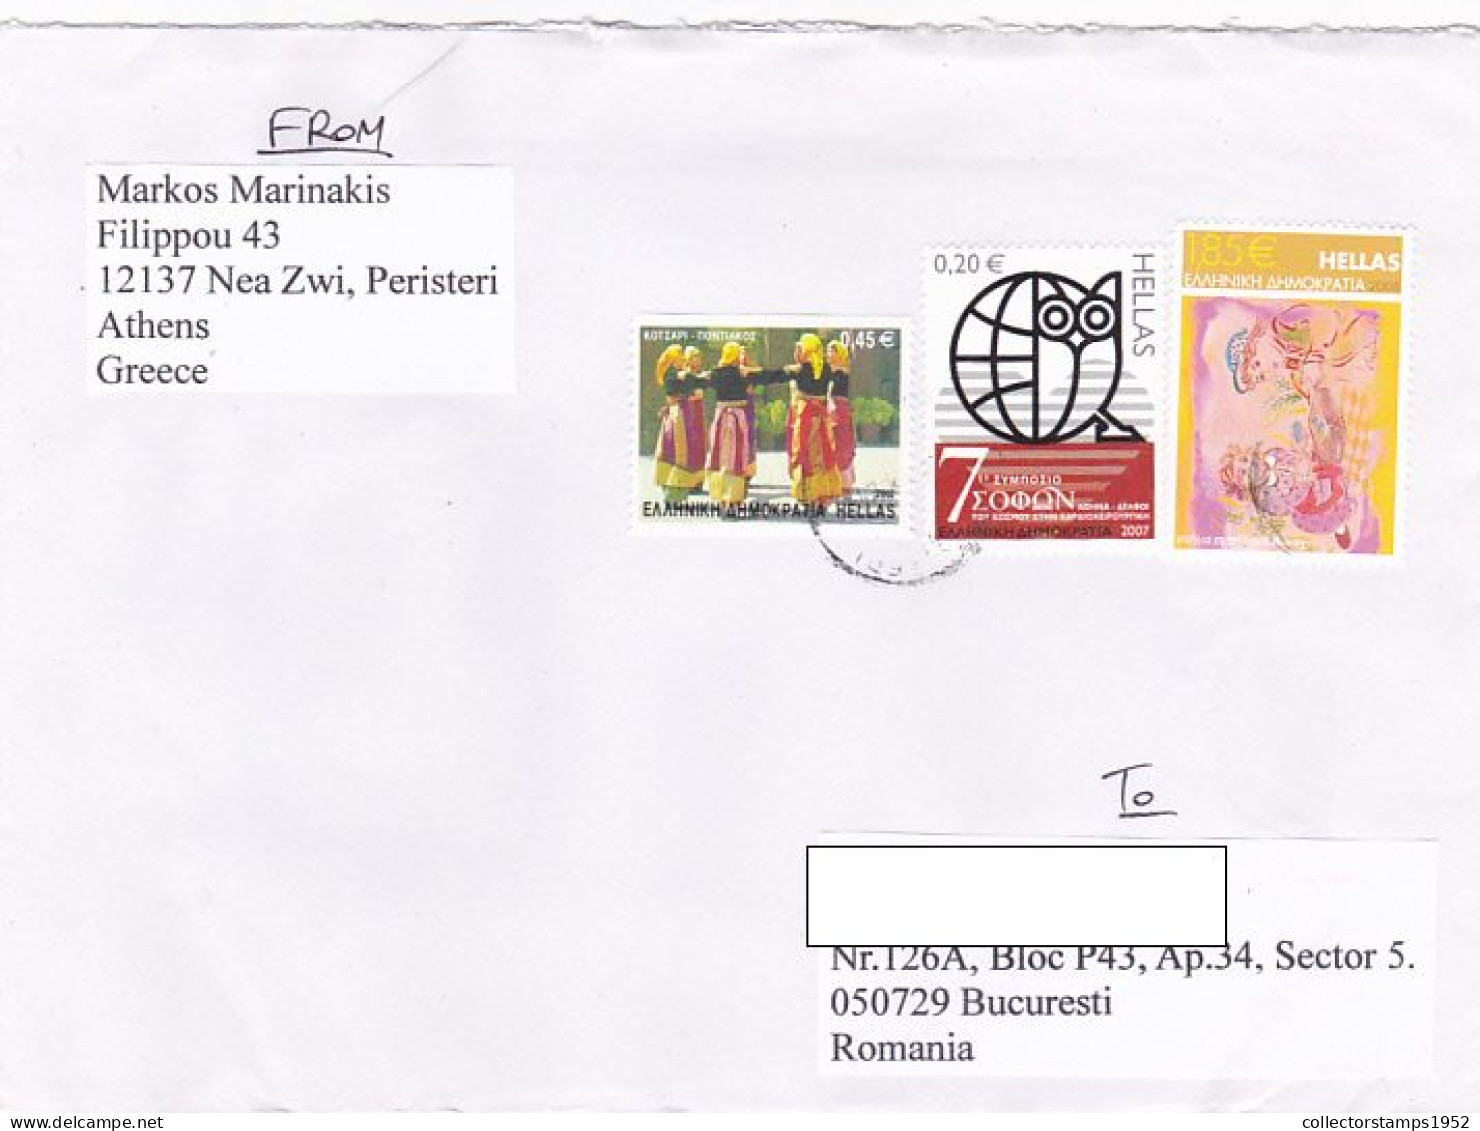 FOLKLORE DANCE AND COSTUMES, MEDICNE, FAIRY TALES, FINE STAMPS ON COVER, 2020, GREECE - Covers & Documents